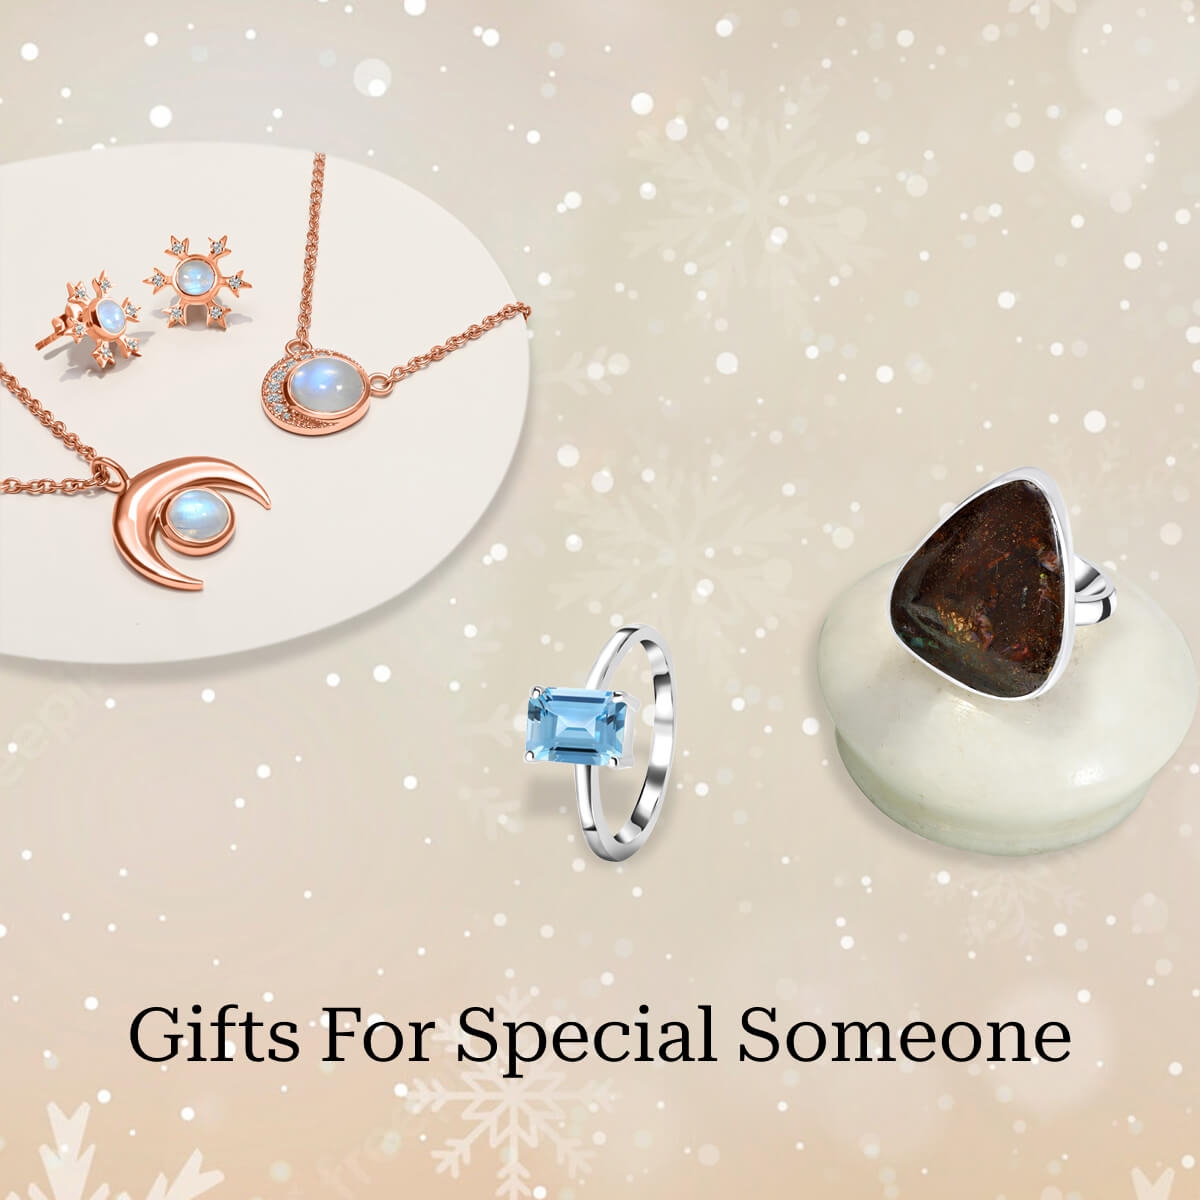 Trending Jewelry Gifts for Special Relationships